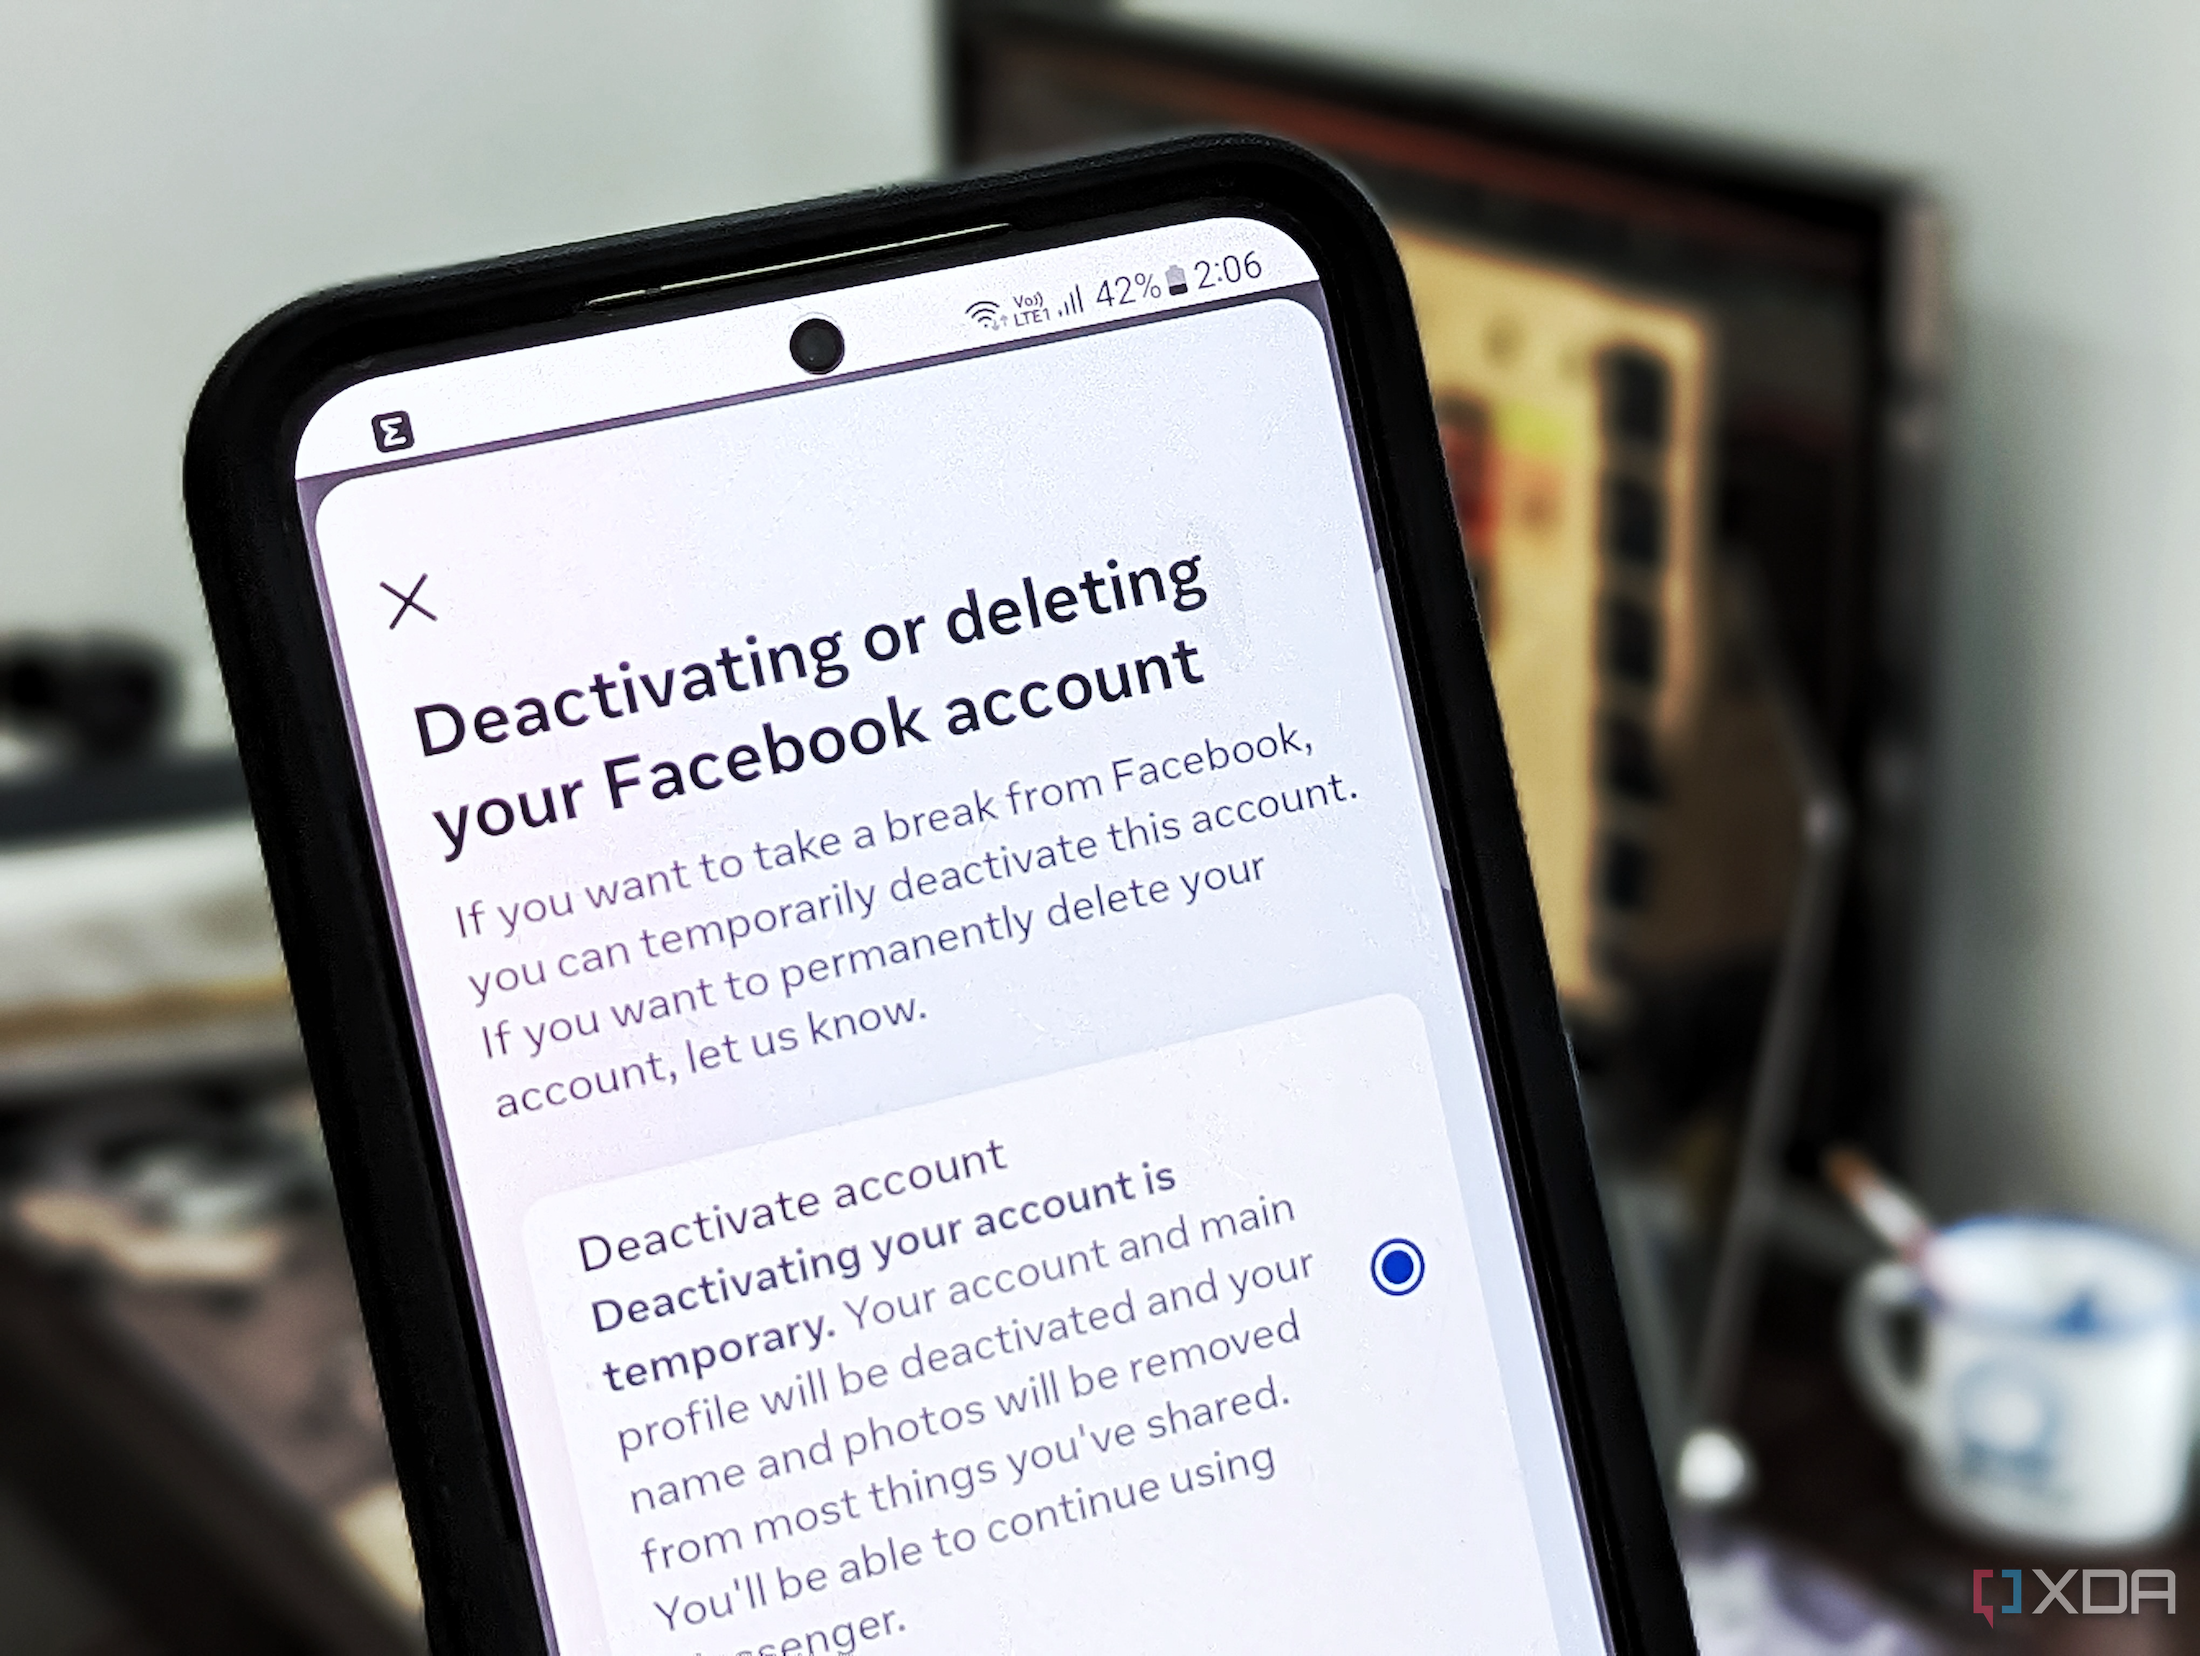 An image of a phone displaying the options to deactivate or delete your Facebook account.